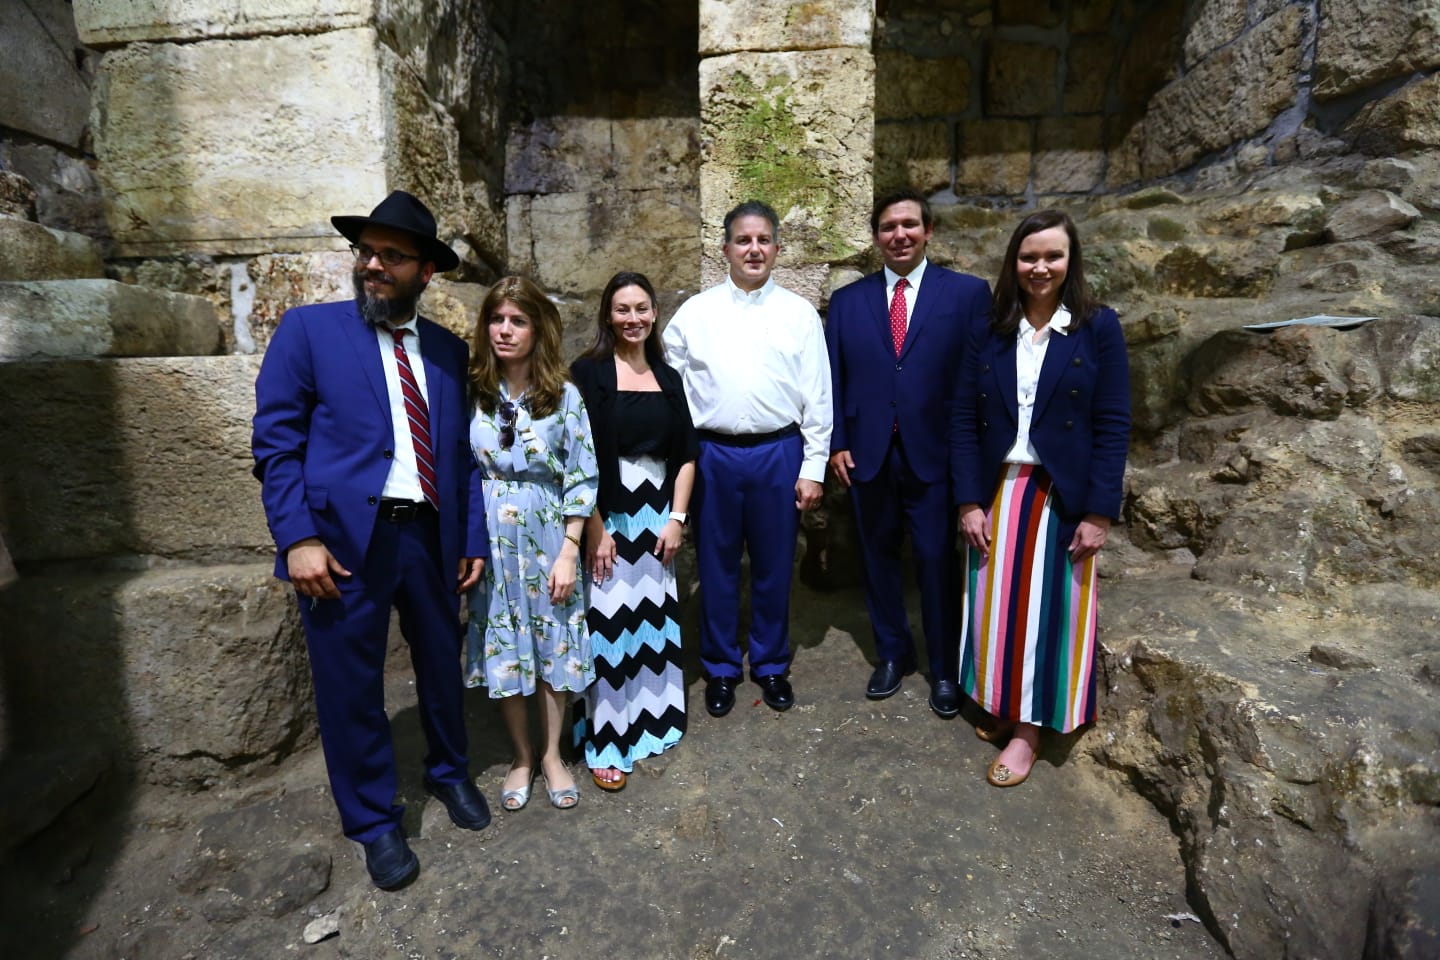   PHOTO RELEASE: Governor Ron DeSantis Visits the Western Wall and the Church of the Holy Sepulchre